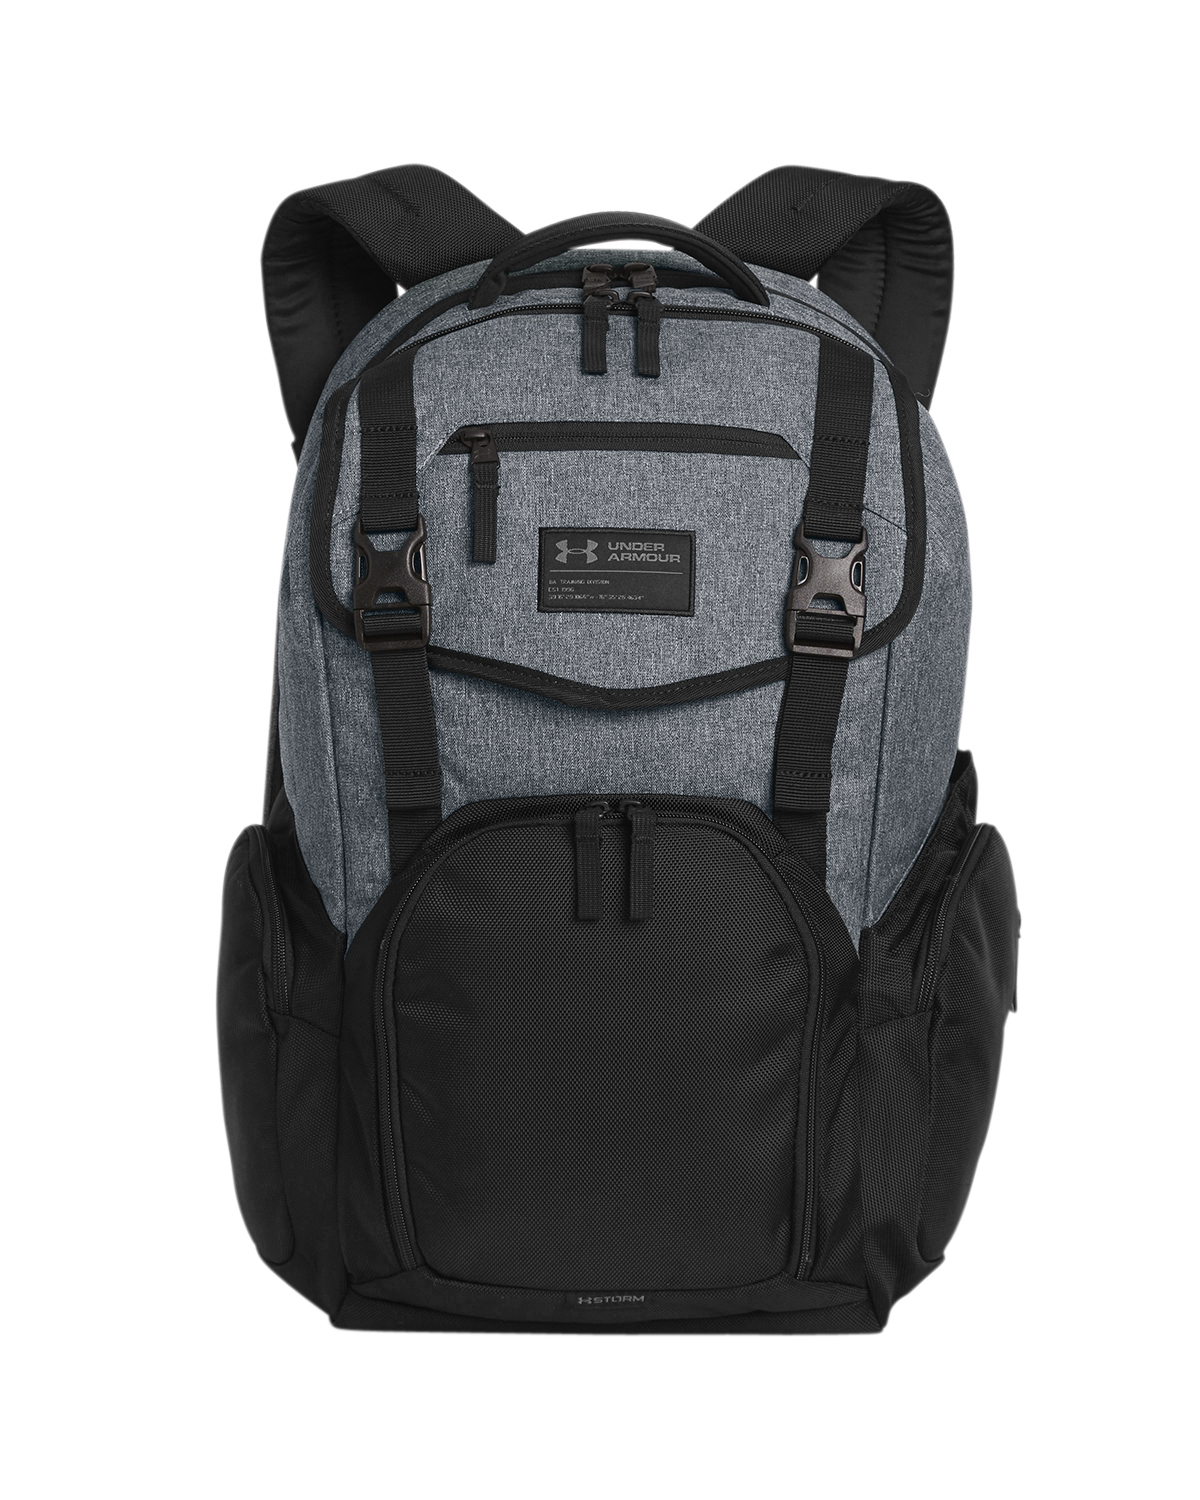 Under Armour Corporate Coalition Backpack